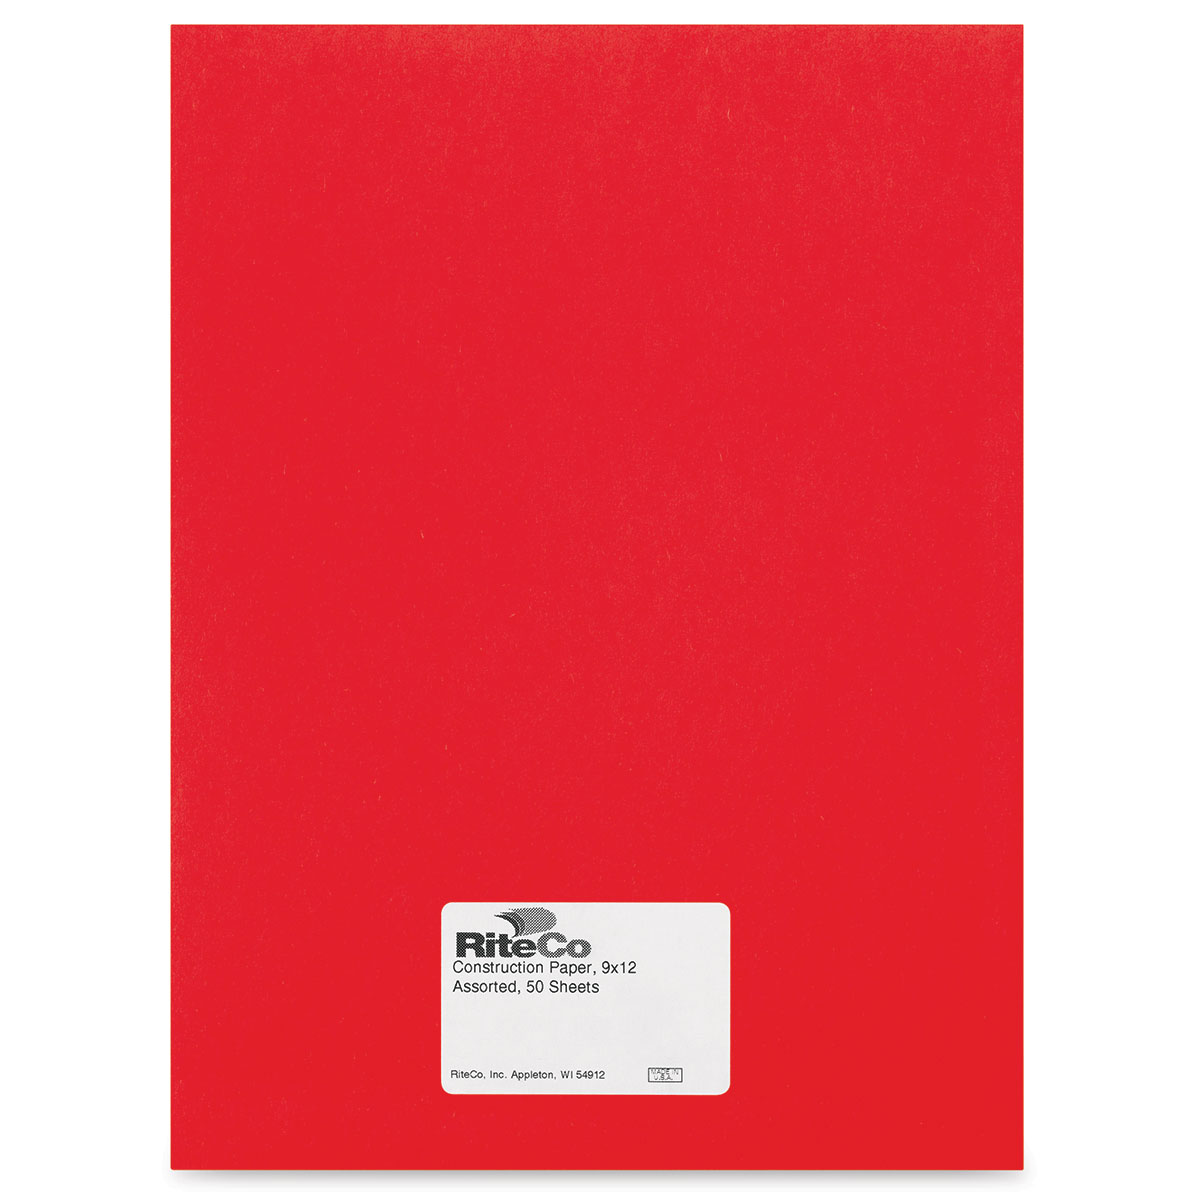 Riteco 24103 Construction Paper by Holiday Red, 9 x 12